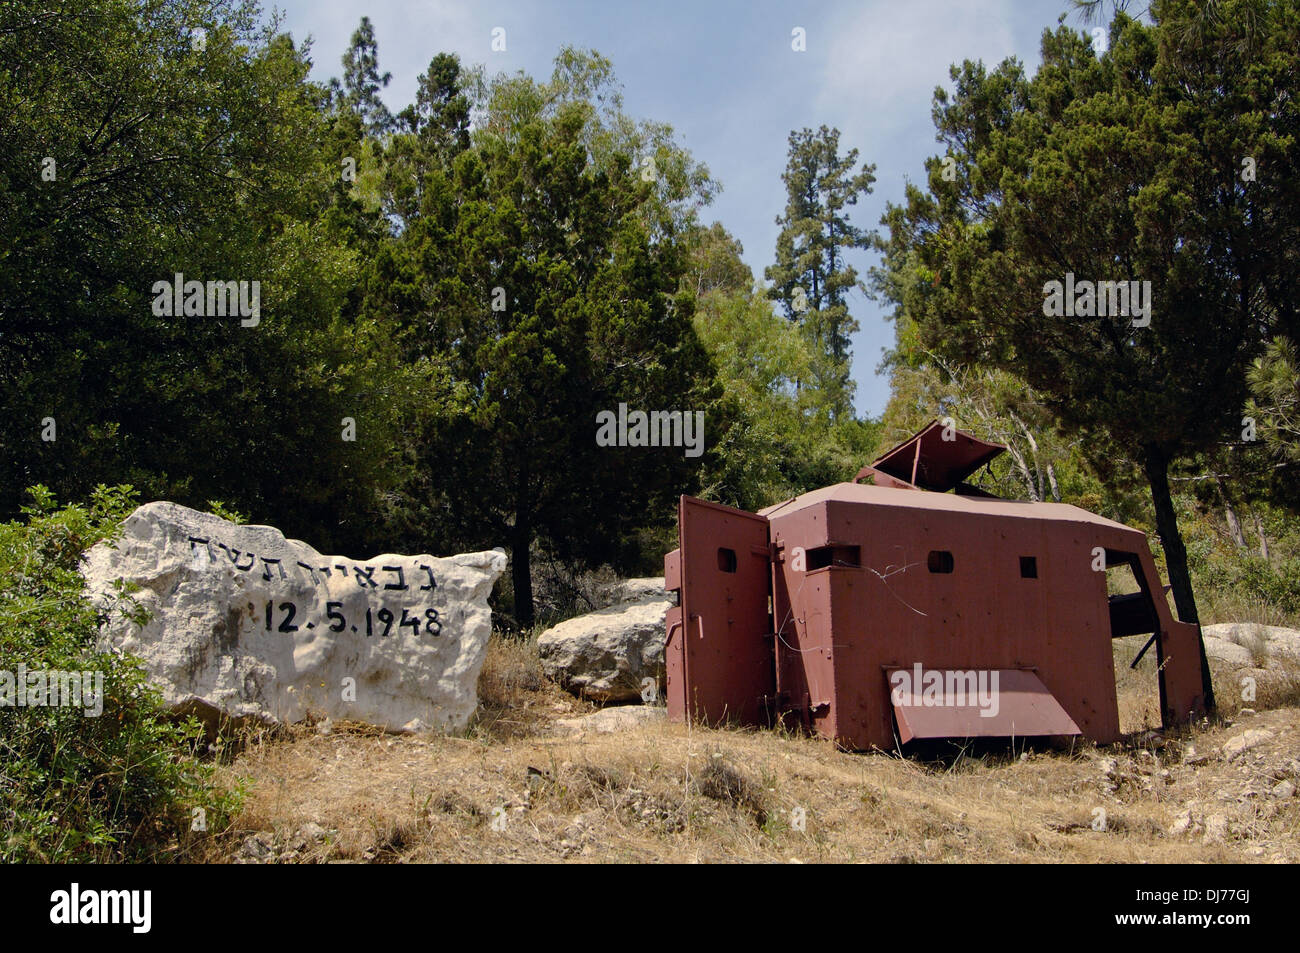 Remains of armored vehicle from 1948 war at Shaar Hagai or Bab El Wad on the main road from Tel Aviv to Jerusalem in Israel Stock Photo